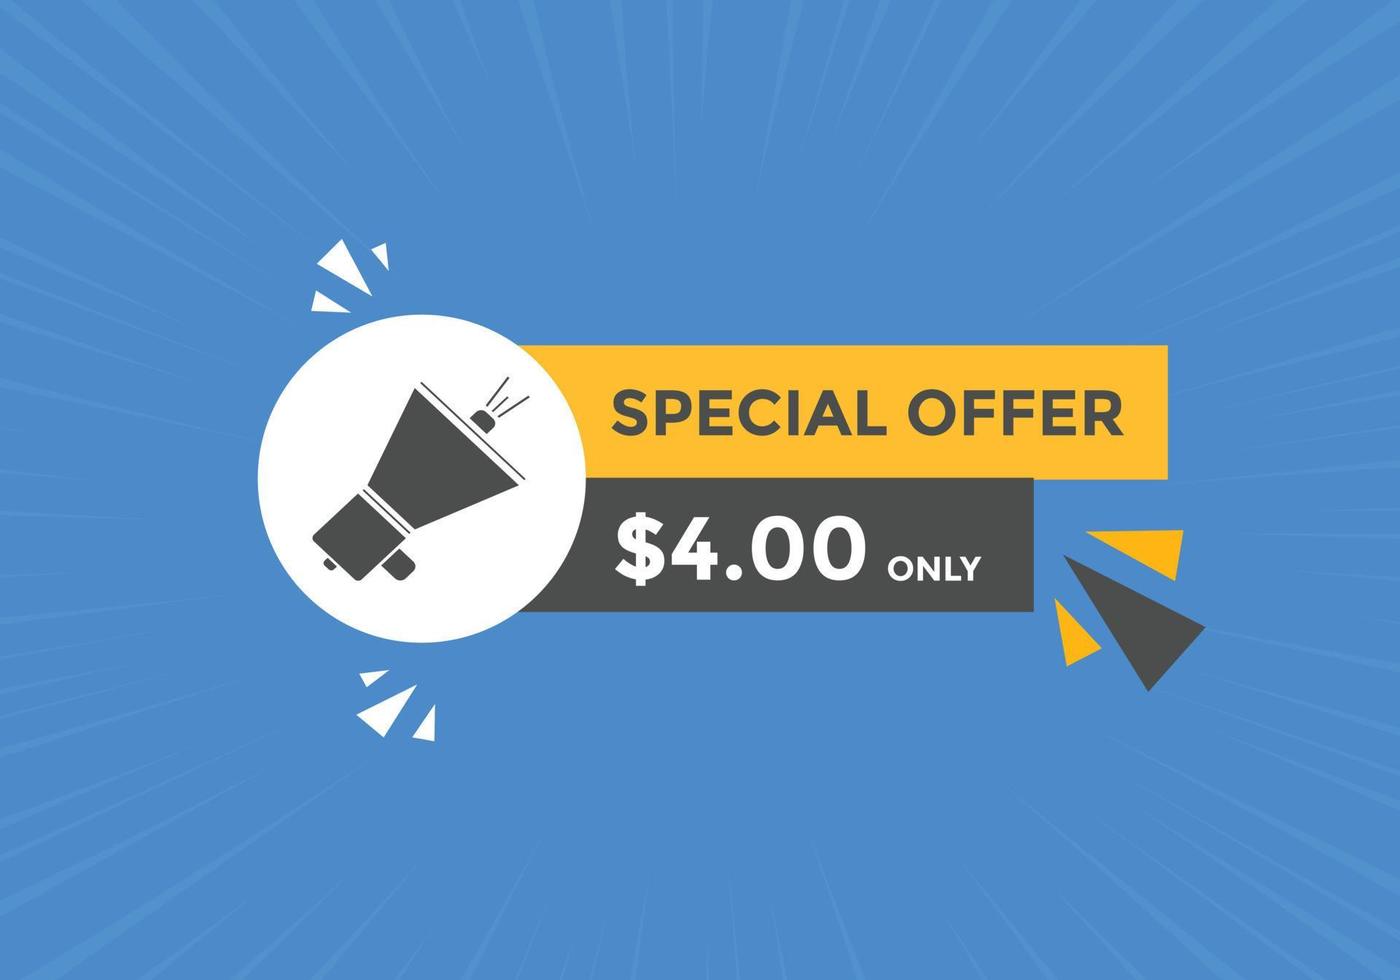 4 USD Dollar Month sale promotion Banner. Special offer, 4 dollar month price tag, shop now button. Business or shopping promotion marketing concept vector